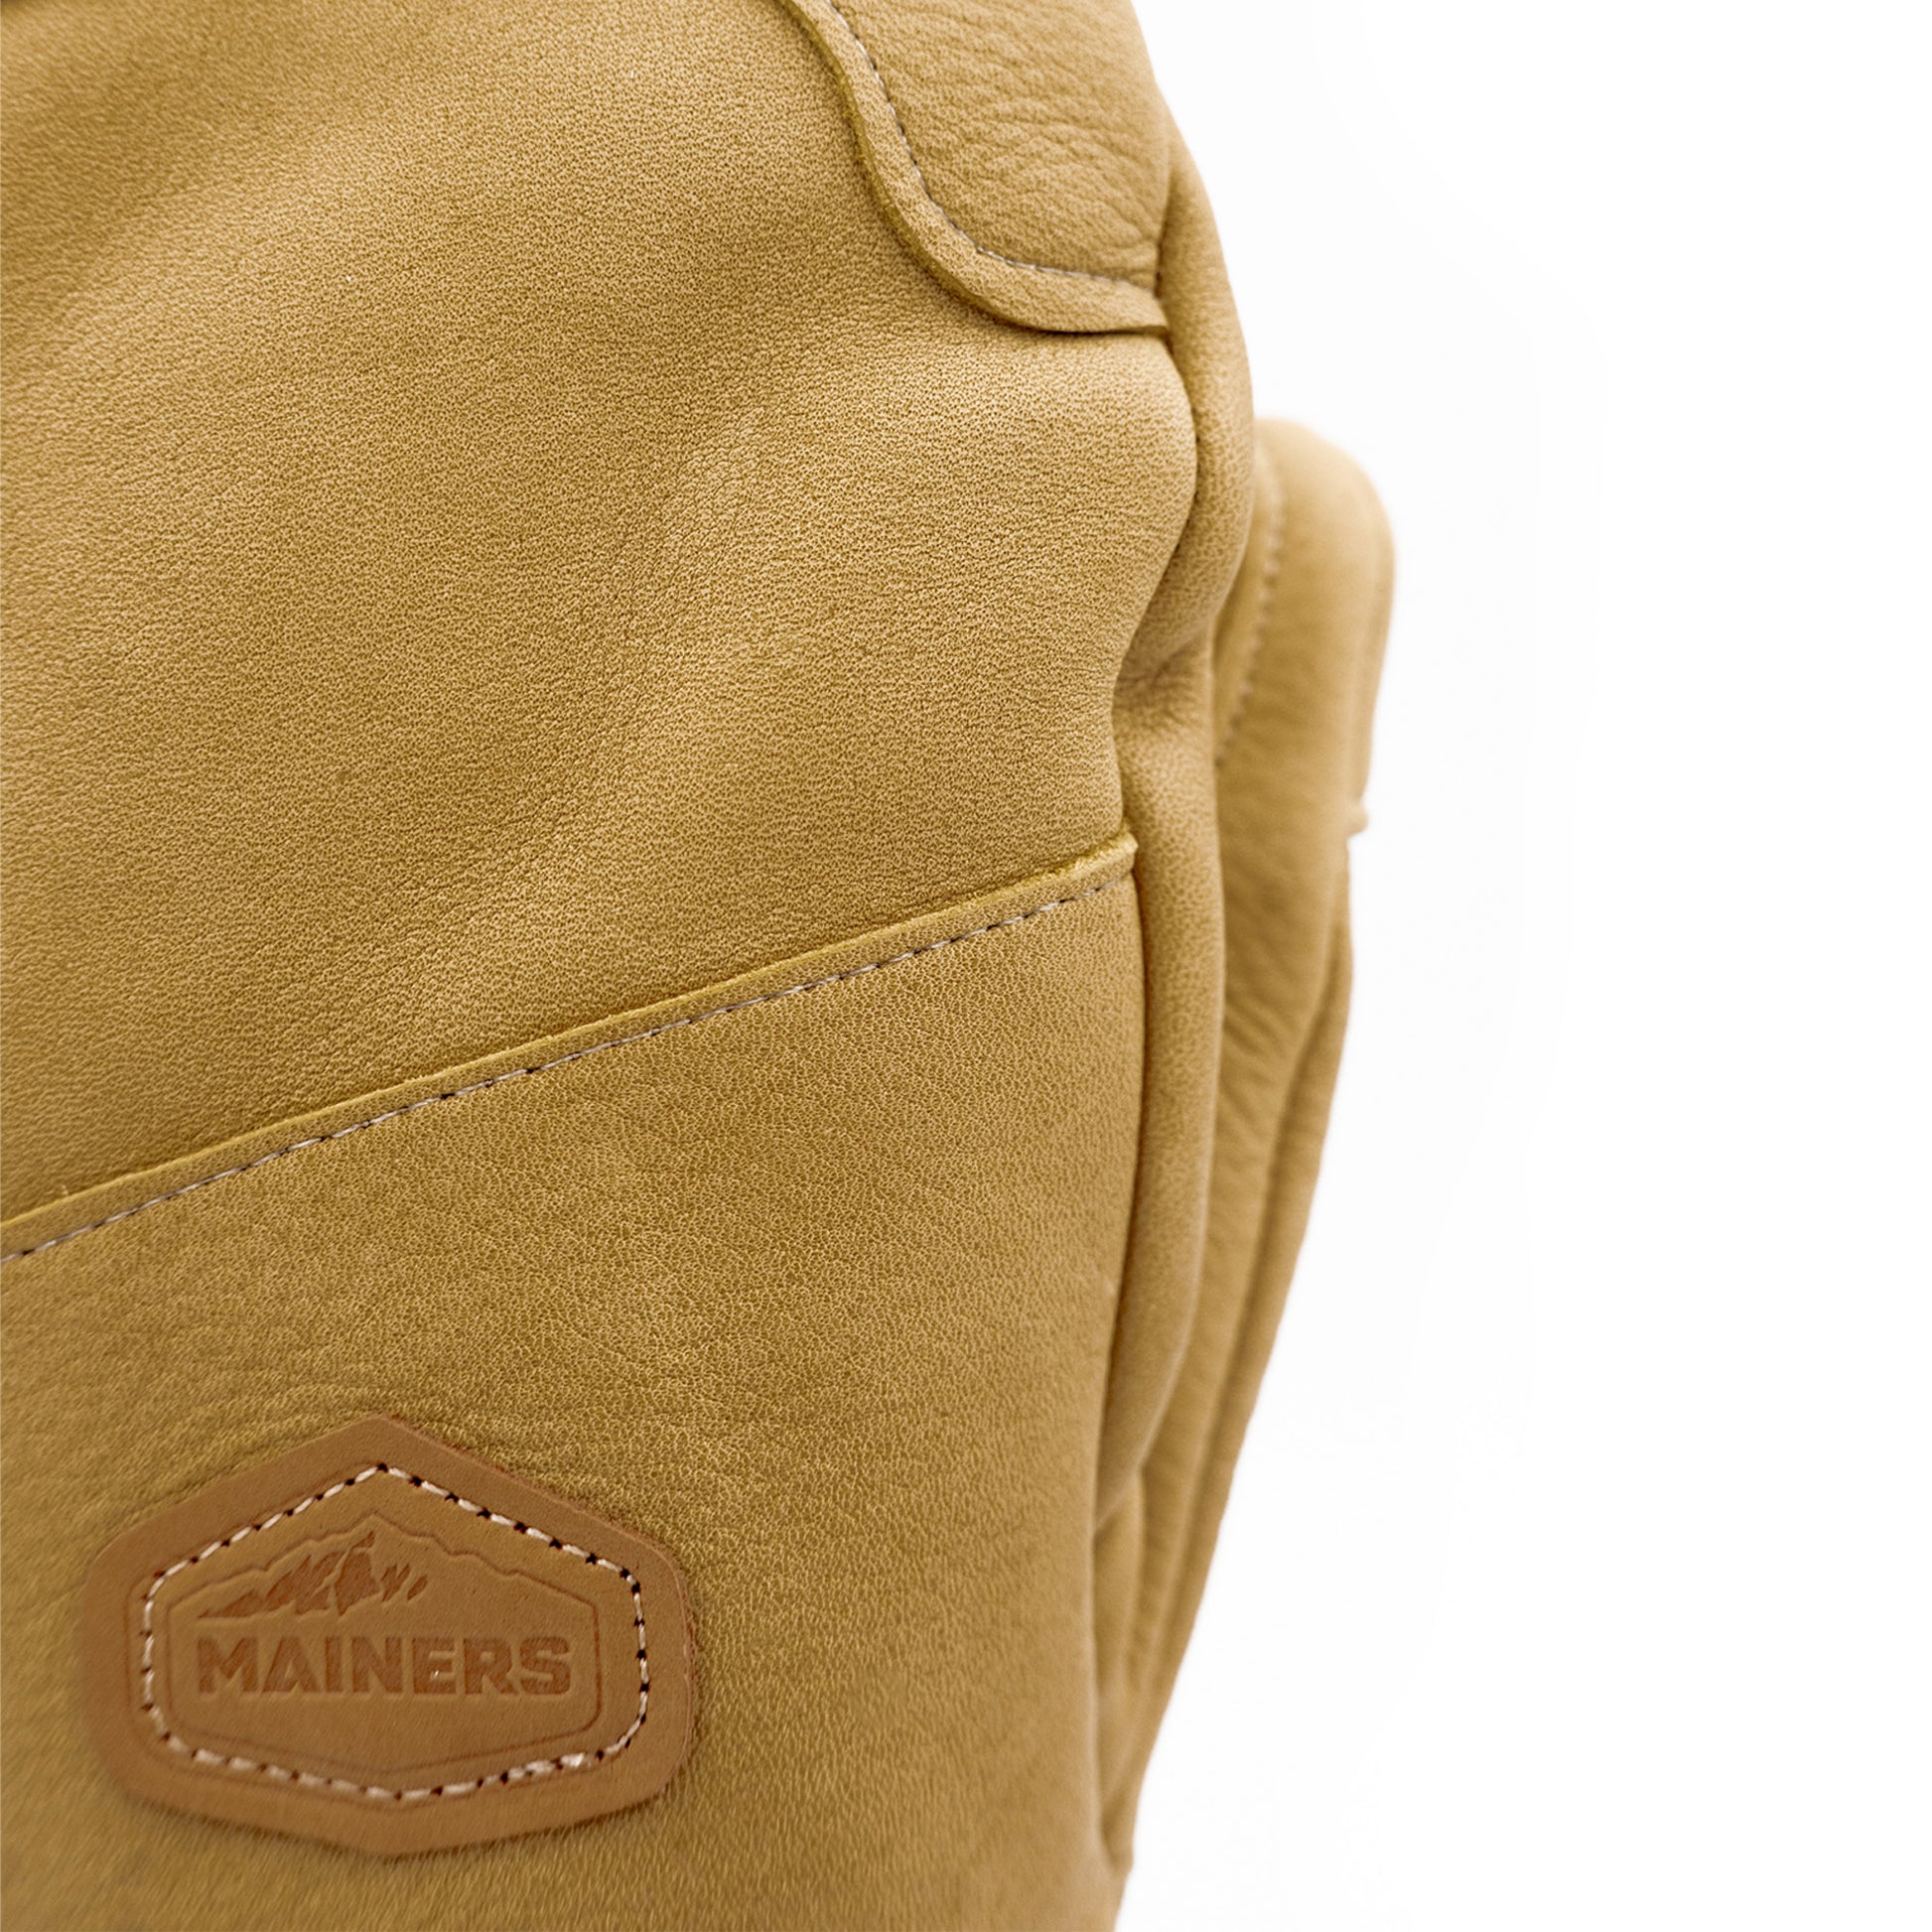 A tan Mainers leather glove with a logo on it, embodying Maine's spirit.